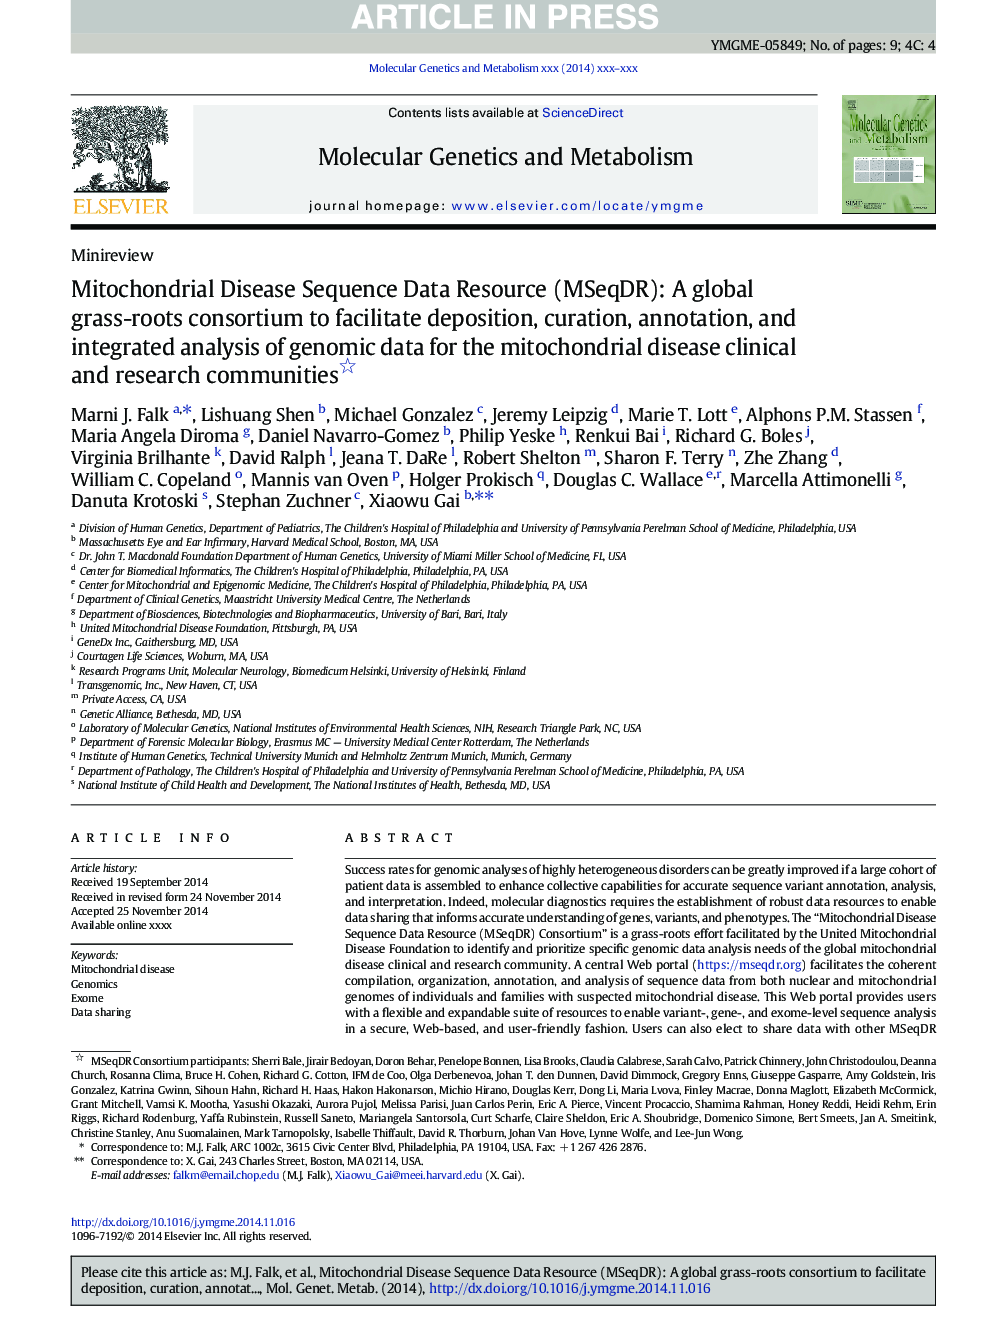 Mitochondrial Disease Sequence Data Resource (MSeqDR): A global grass-roots consortium to facilitate deposition, curation, annotation, and integrated analysis of genomic data for the mitochondrial disease clinical and research communities